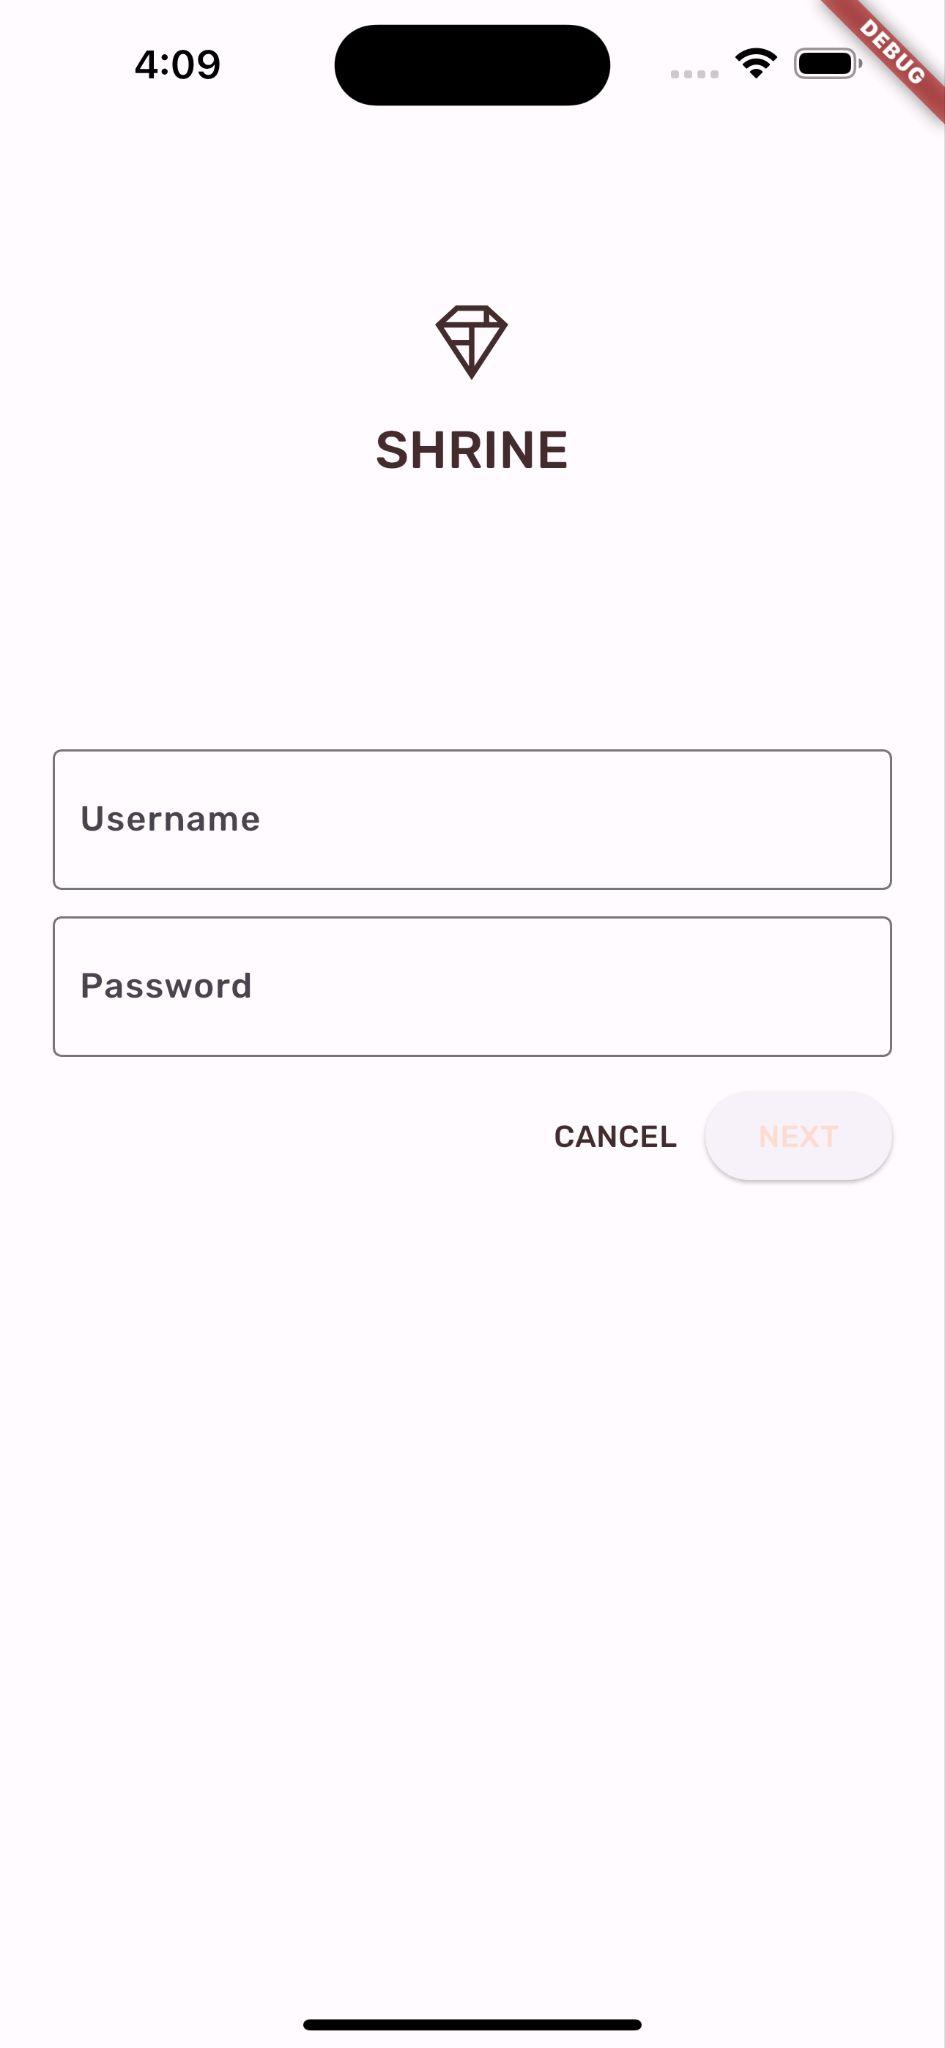 Shrine login page with accessible CANCEL button